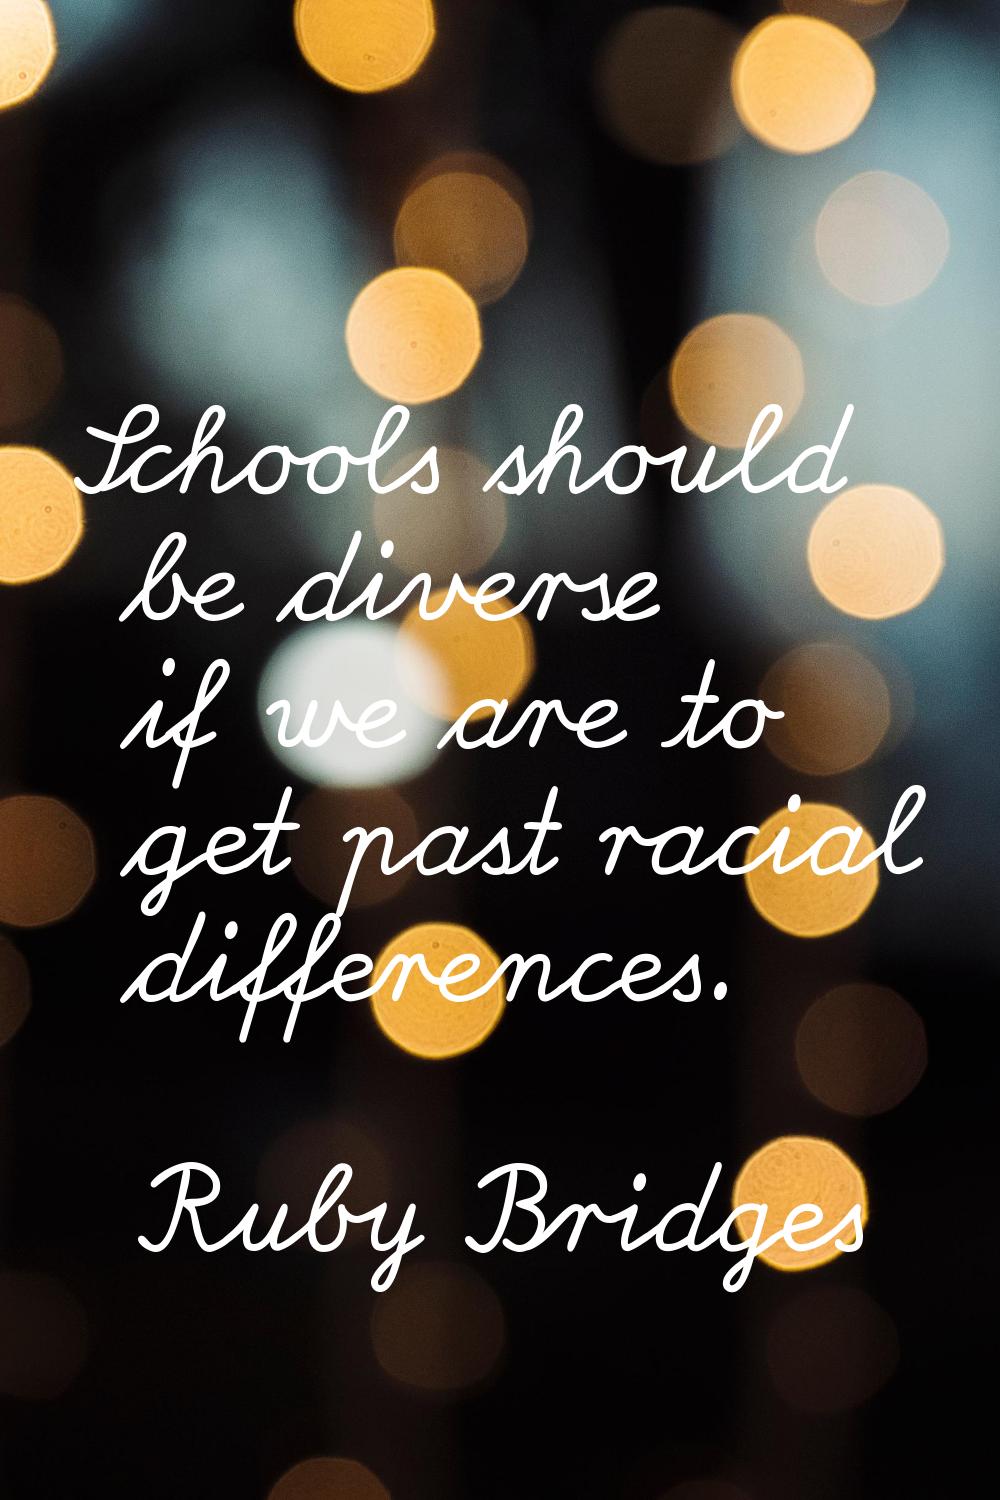 Schools should be diverse if we are to get past racial differences.